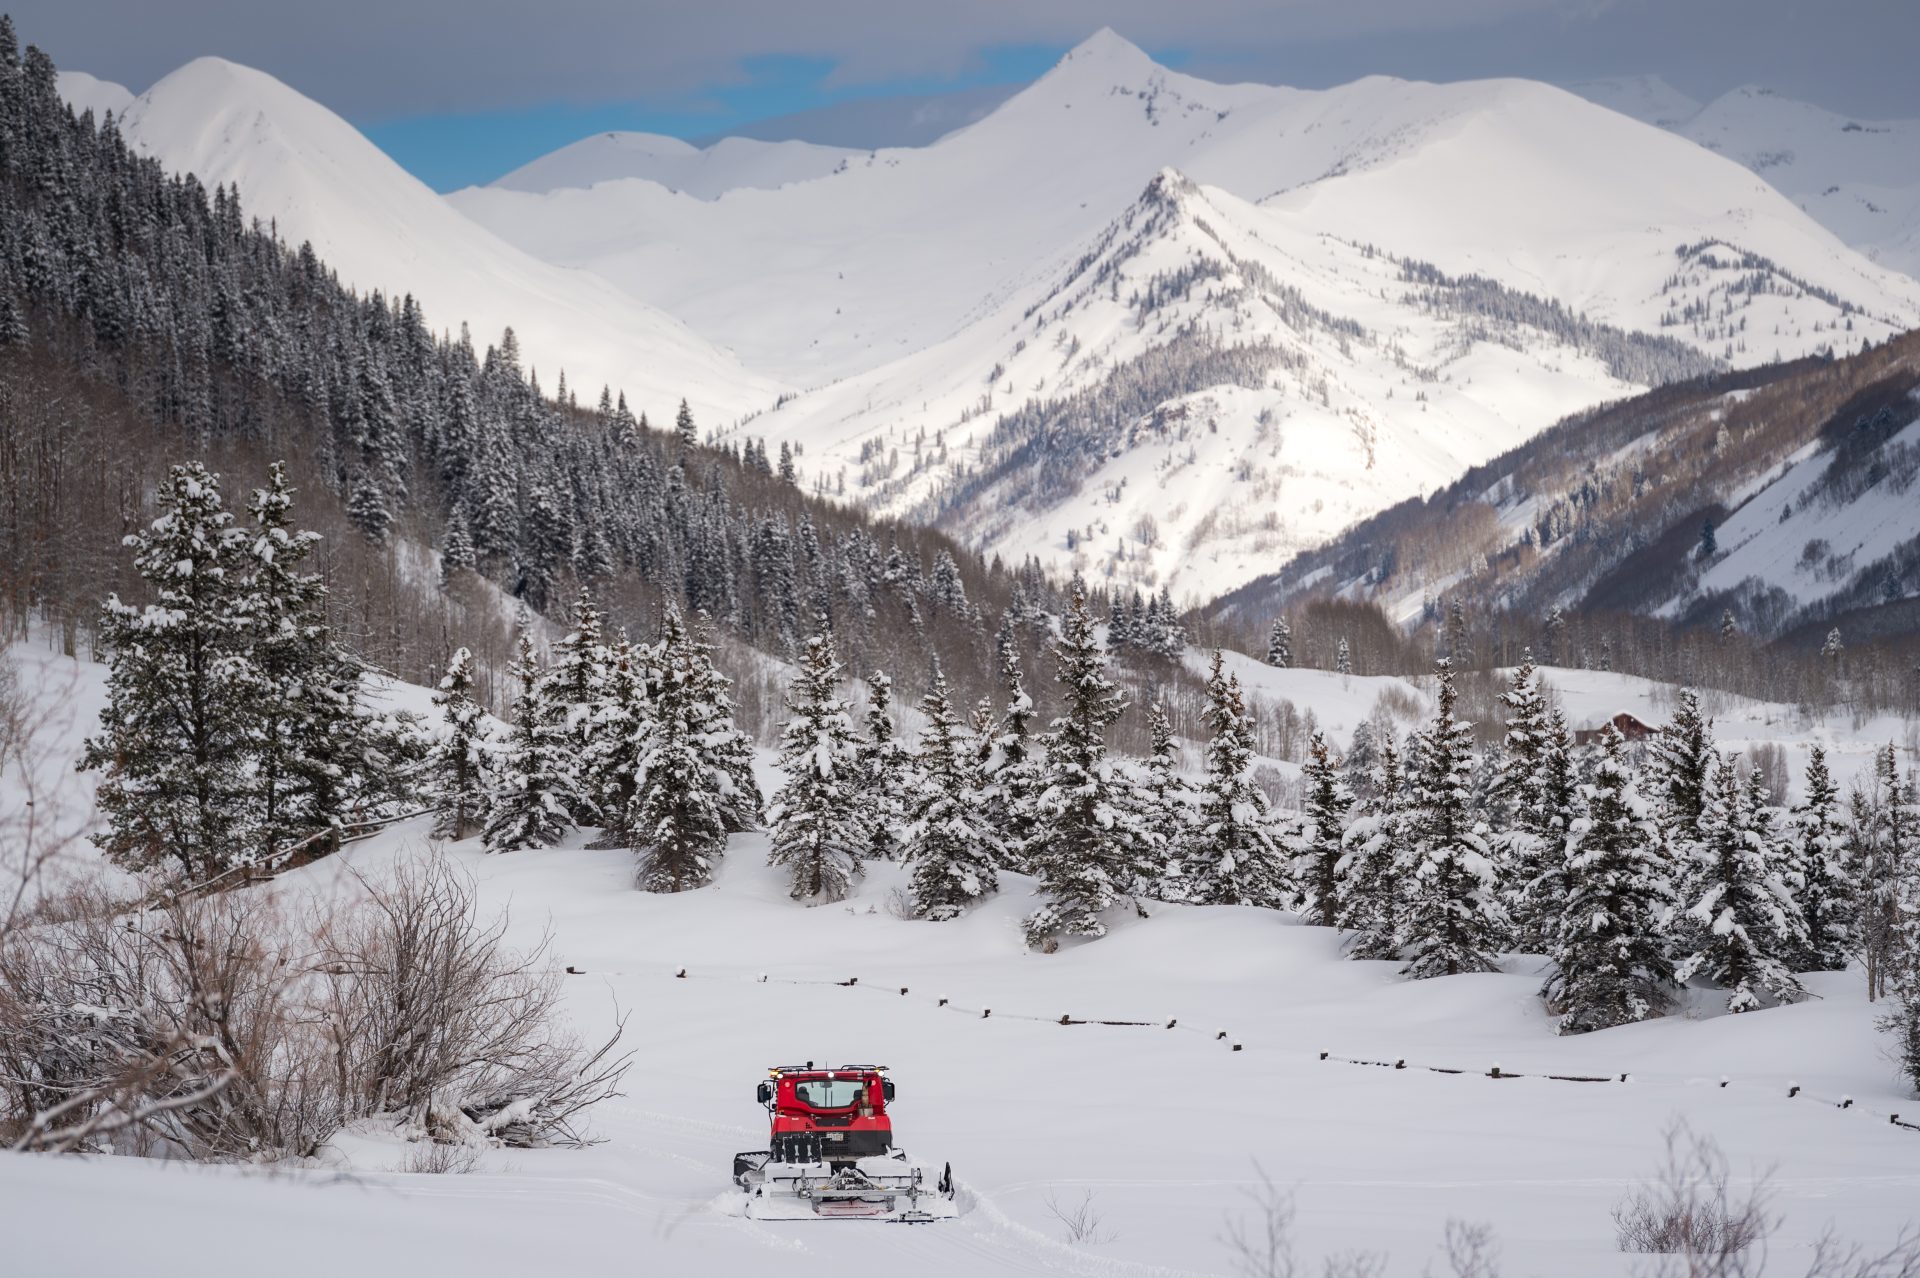 Snow cat grooming CB Nordic trails with Paradise Divide backdrop